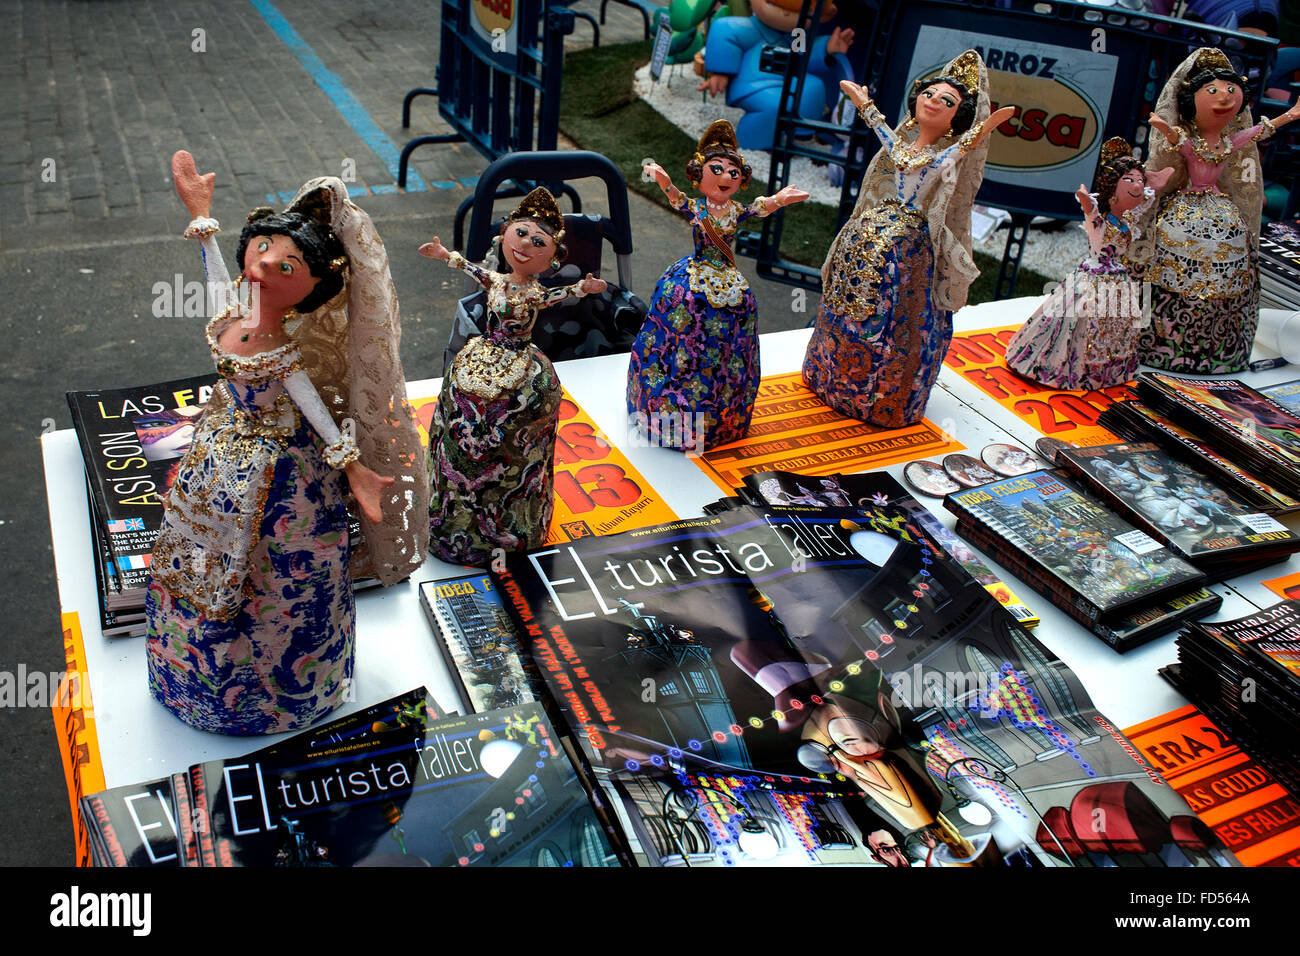 Falleras dressed dolls is one of the souvenirs that can be purchased during the festival of Las Fallas Stock Photo